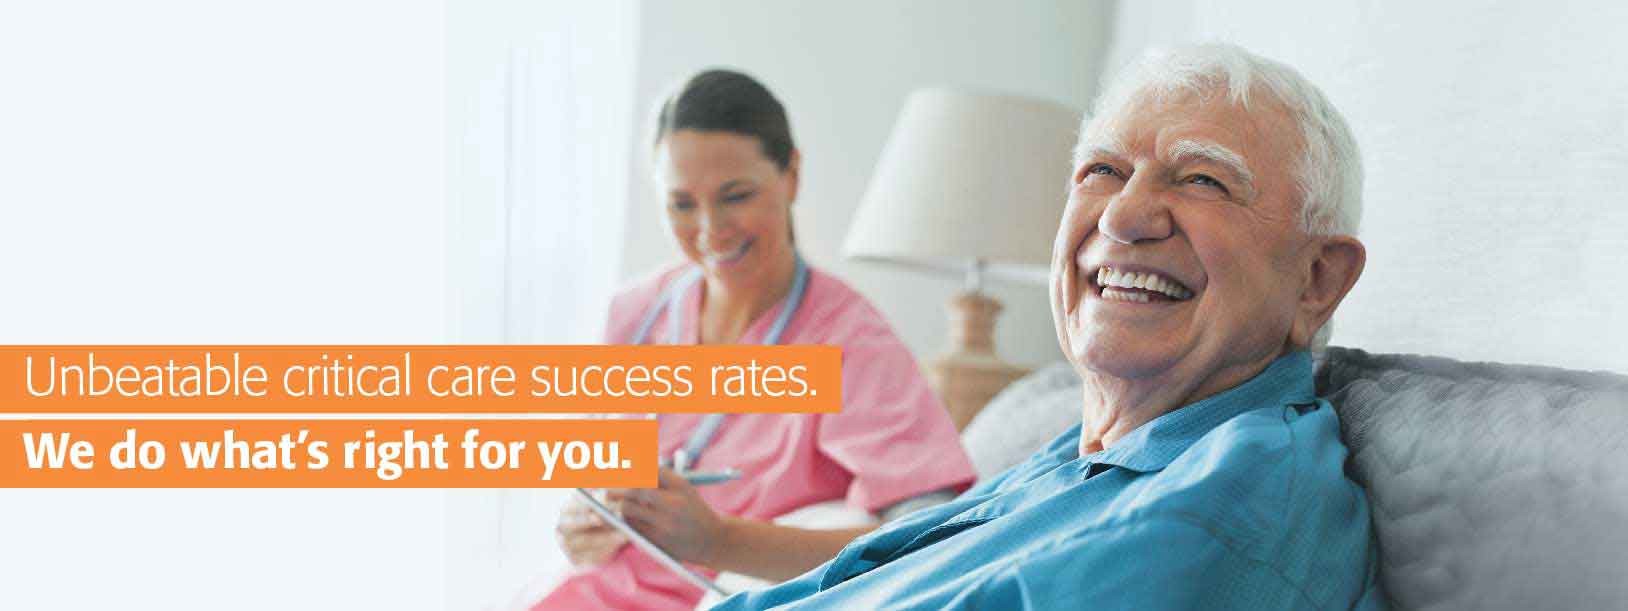 unbeatable critical care success rates we do what's right for you